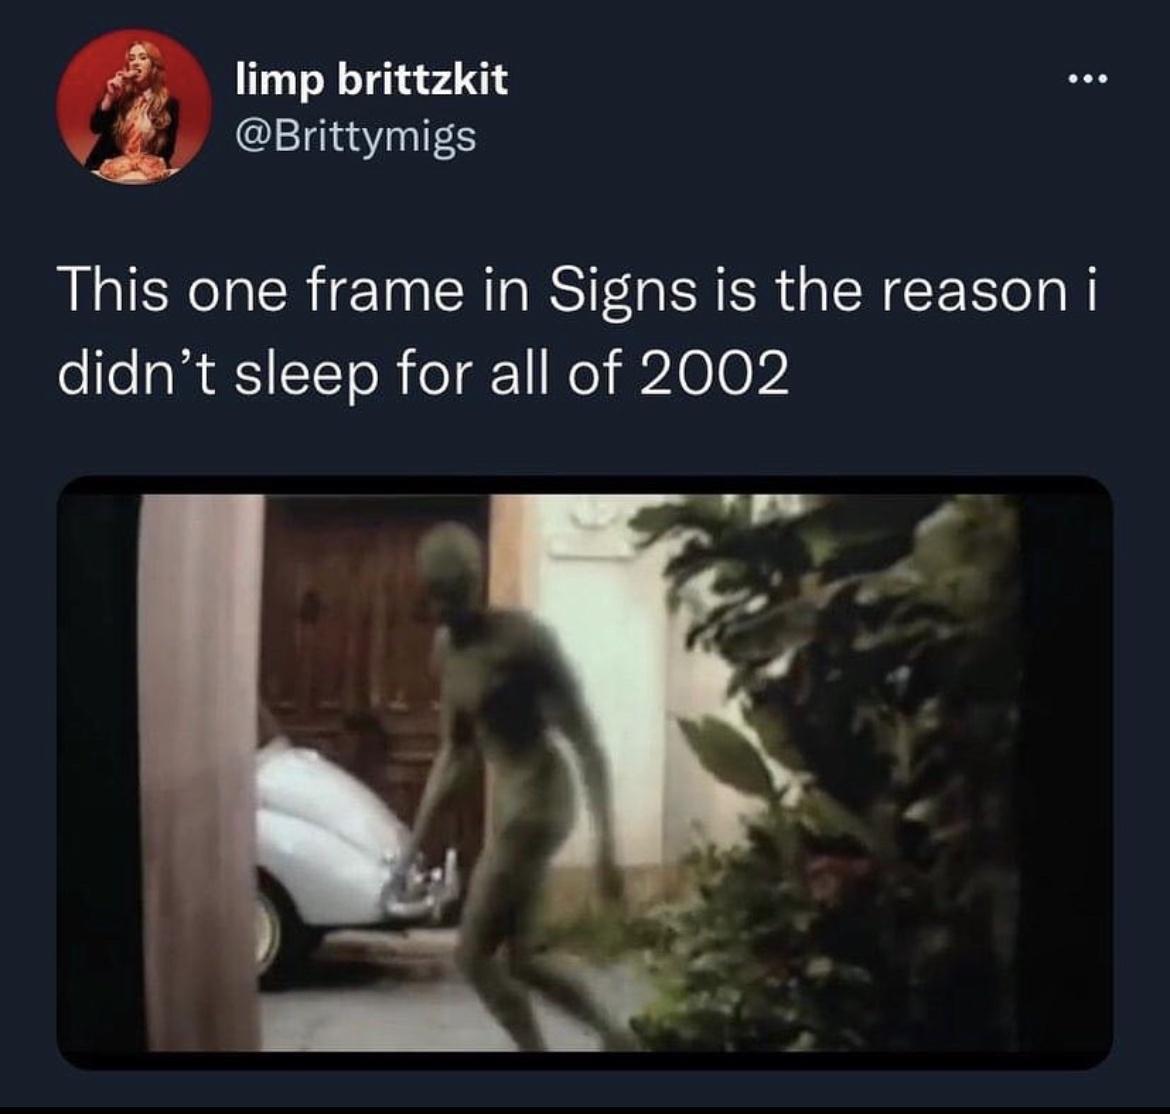 funny tweets and memes - fauna - limp brittzkit ... This one frame in Signs is the reason i didn't sleep for all of 2002